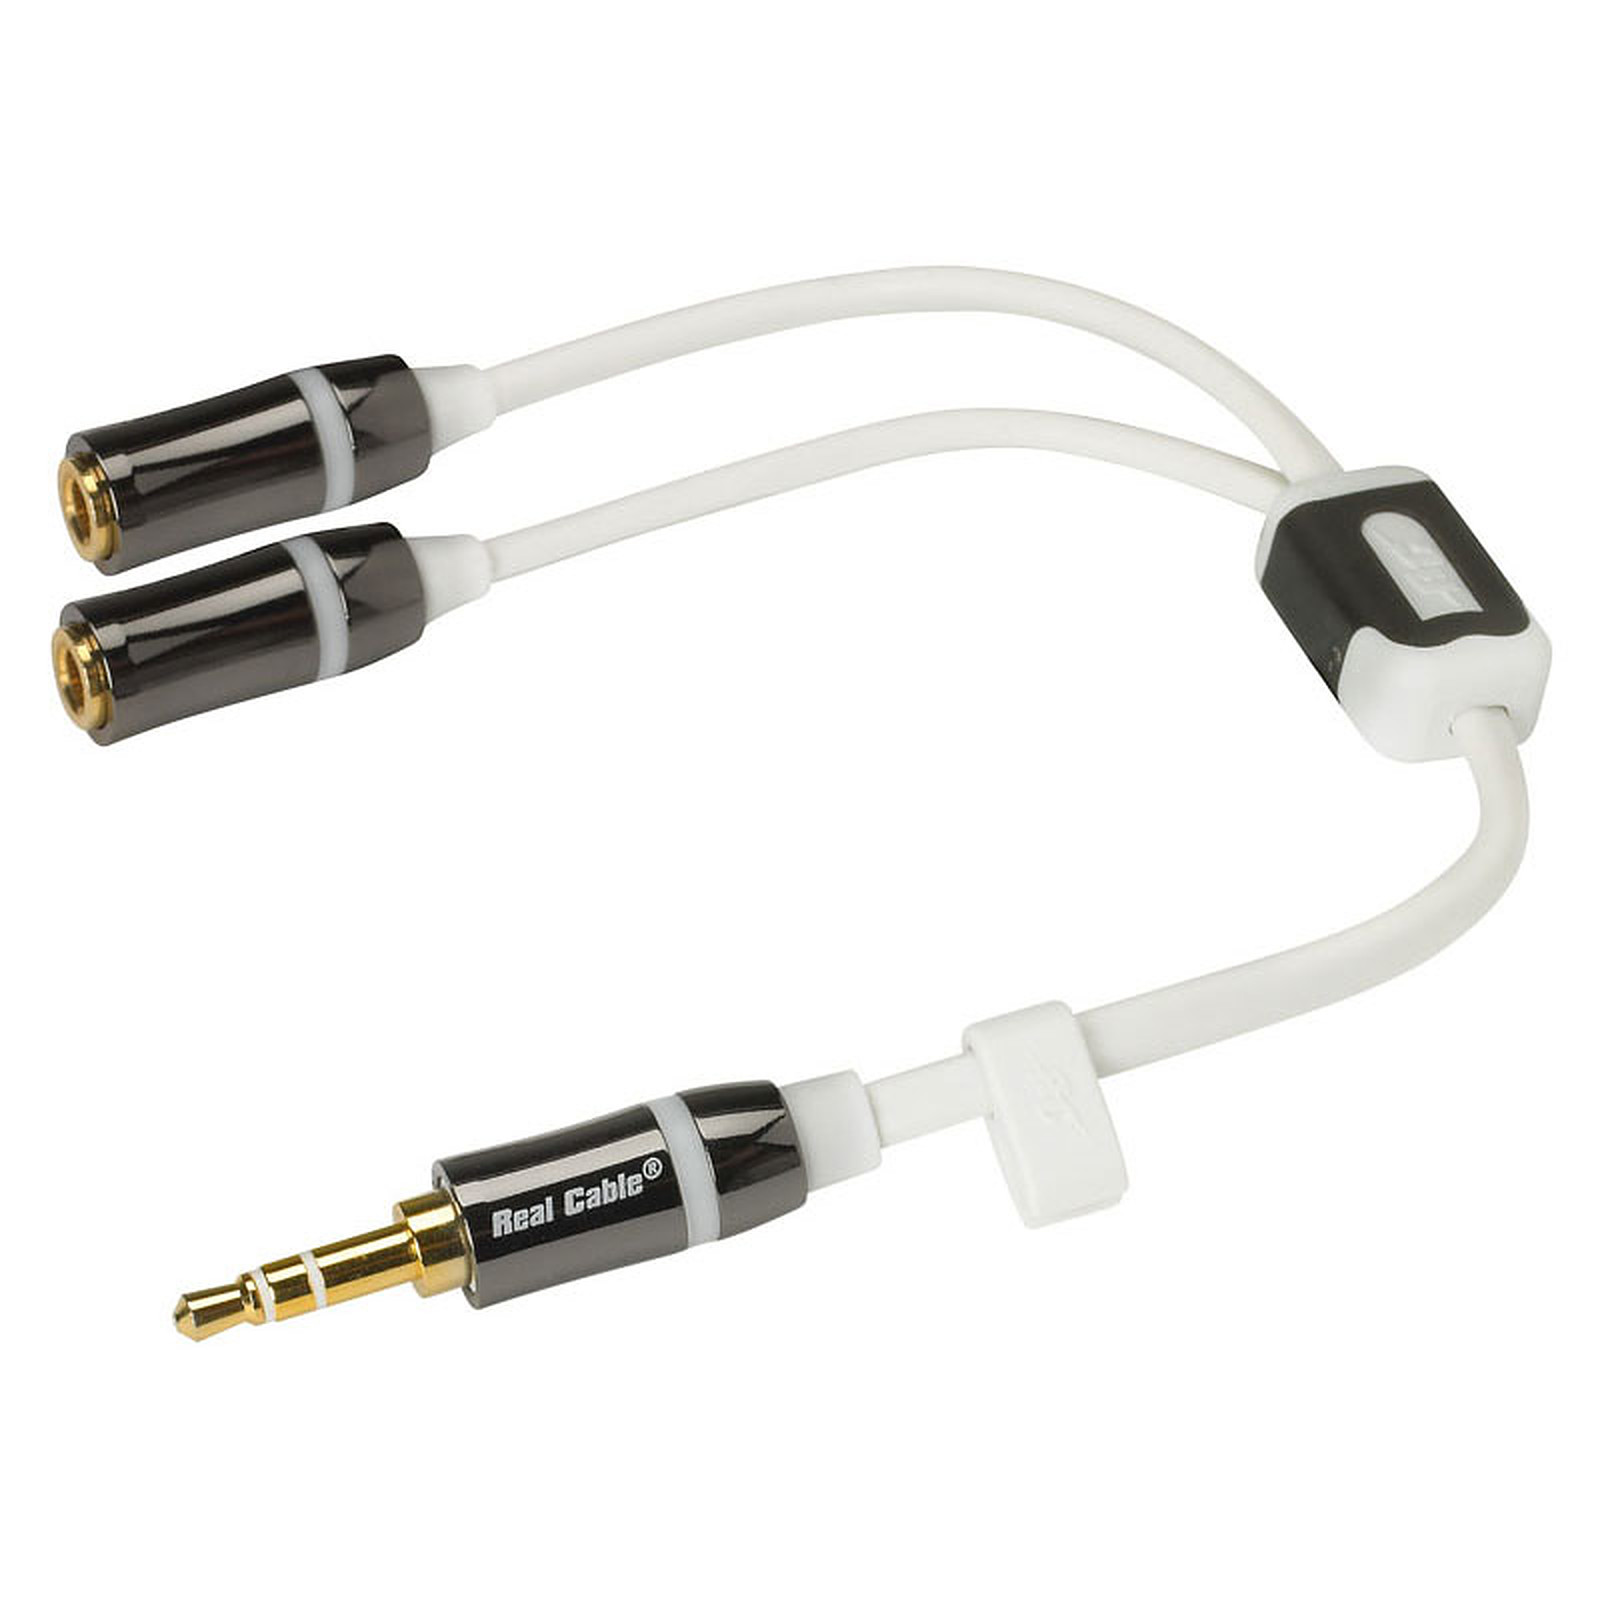 Real Cable iPlug J35M2F - Adaptateur audio Real Cable